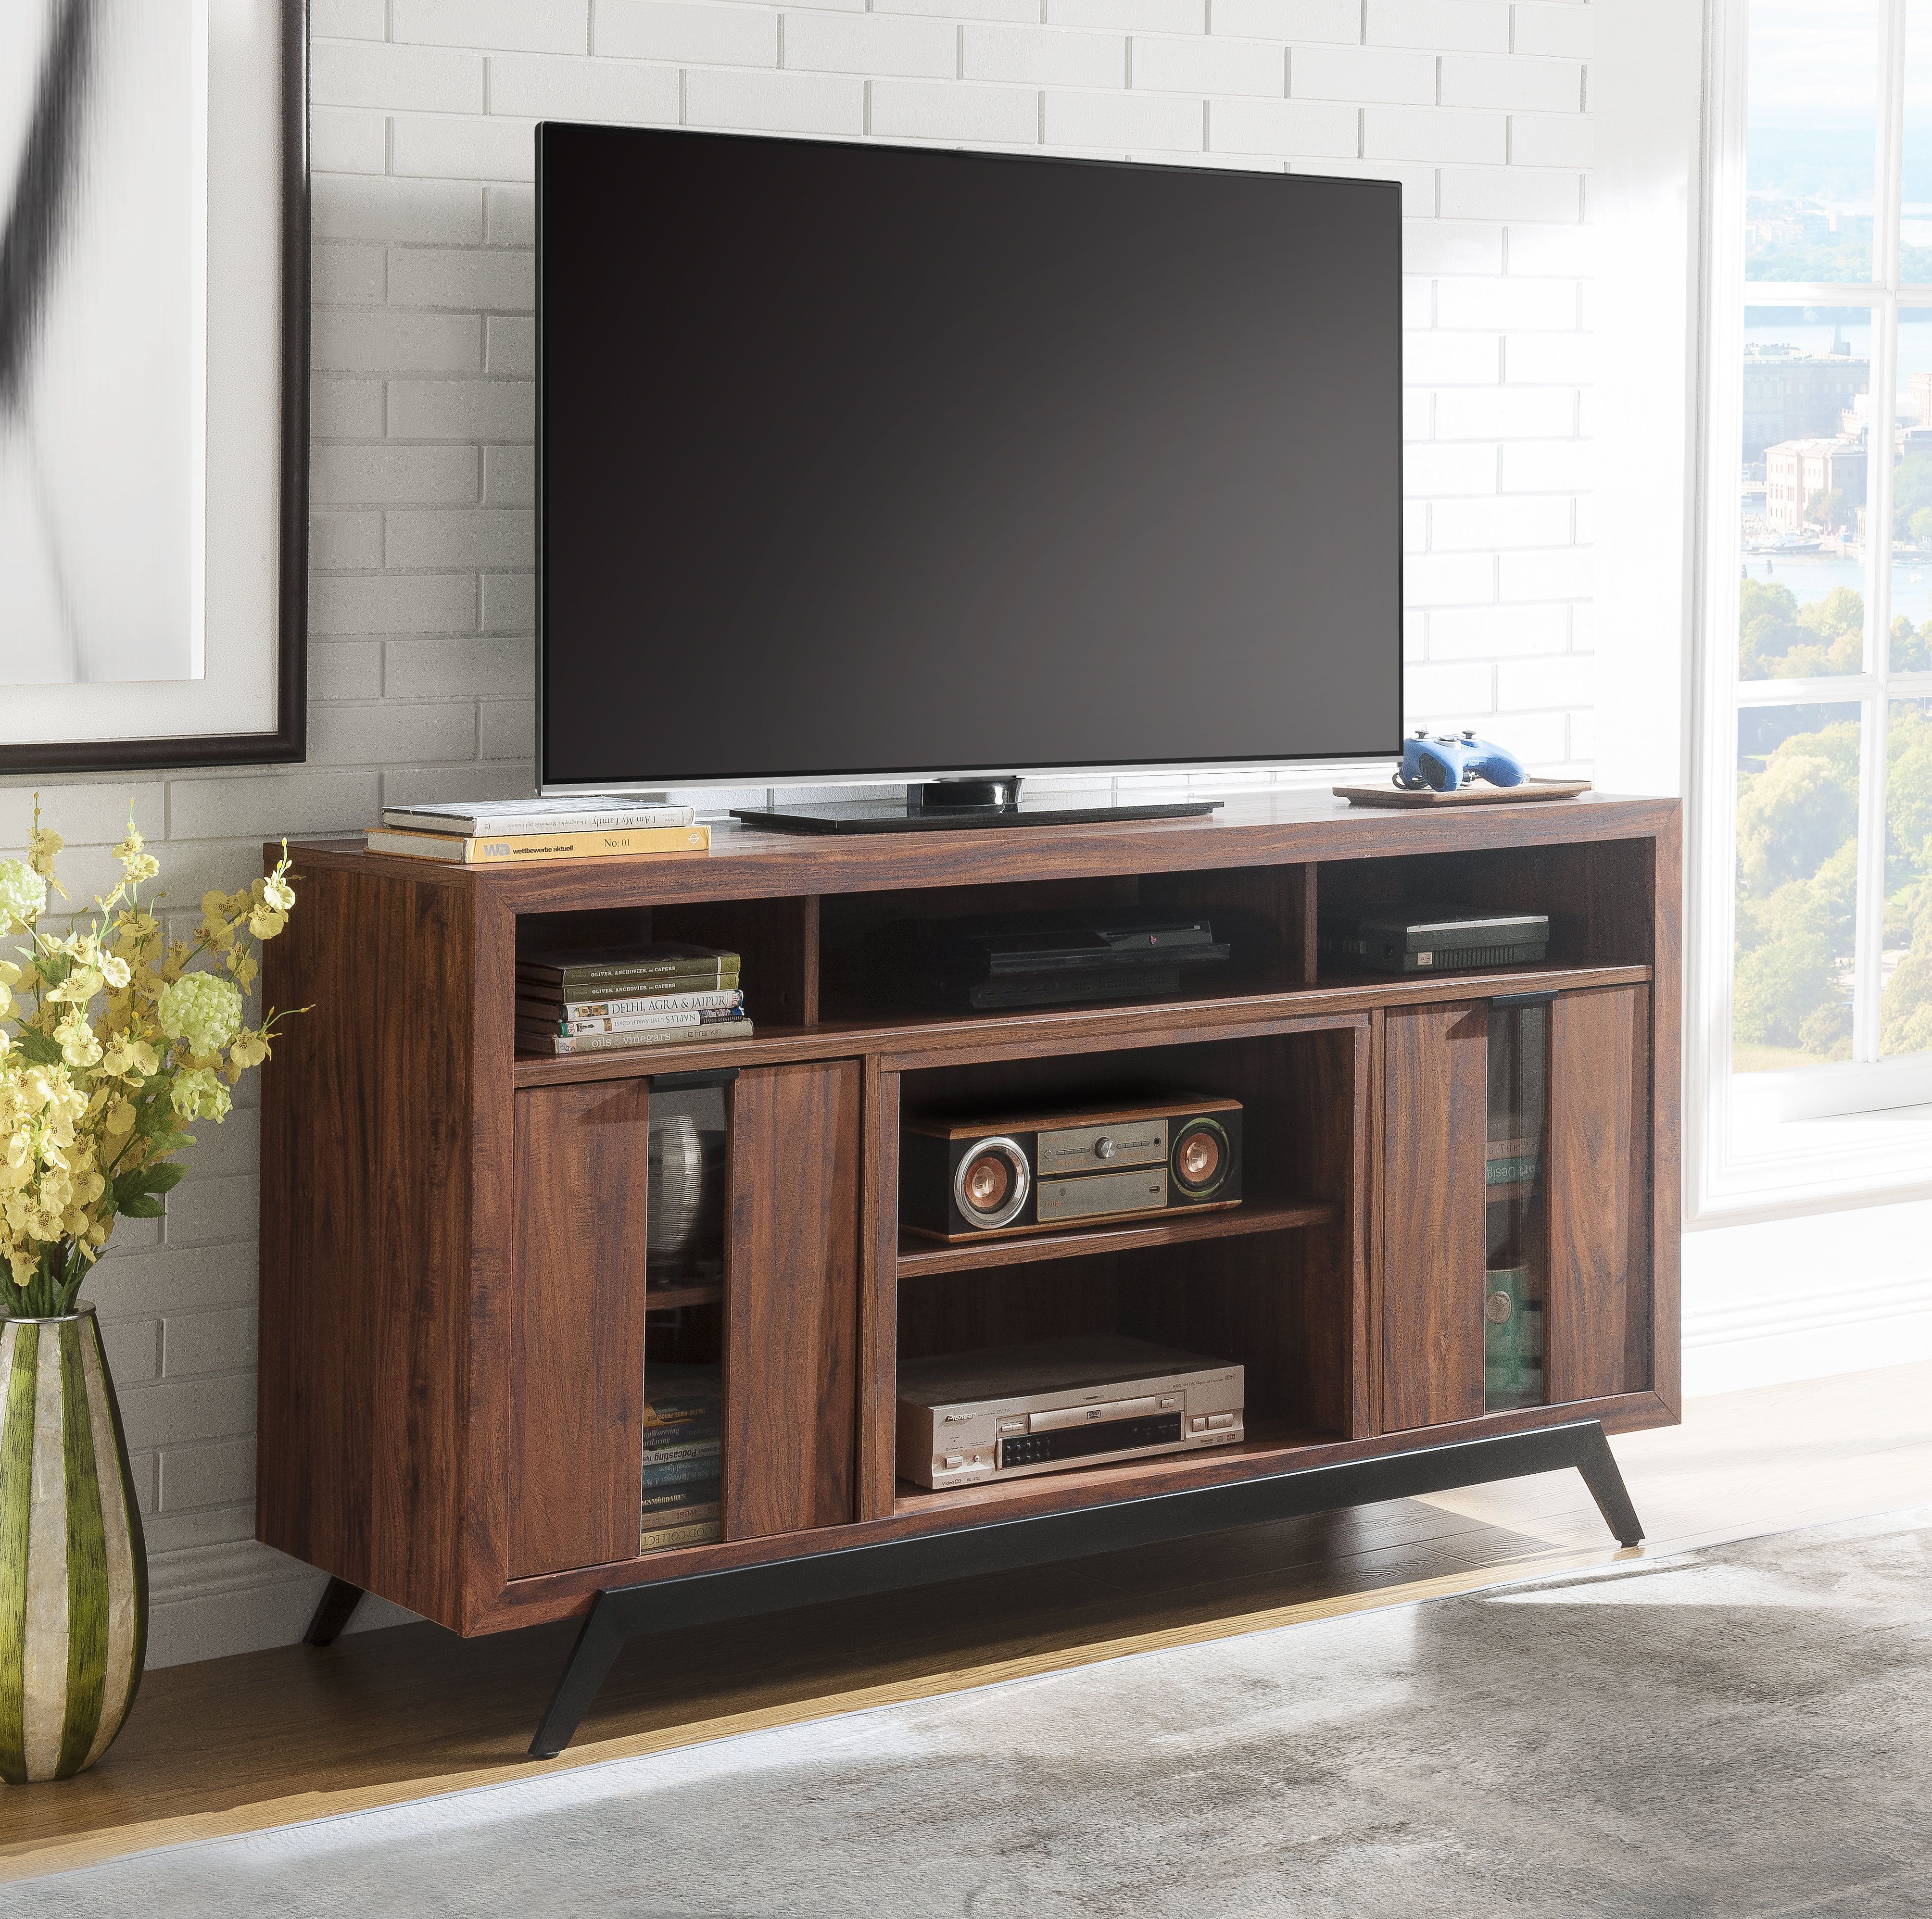 Dimplex Luna Tv Stand For Tvs Up To 60" | Wayfair For Edwin Grey 64 Inch Tv Stands (View 7 of 30)